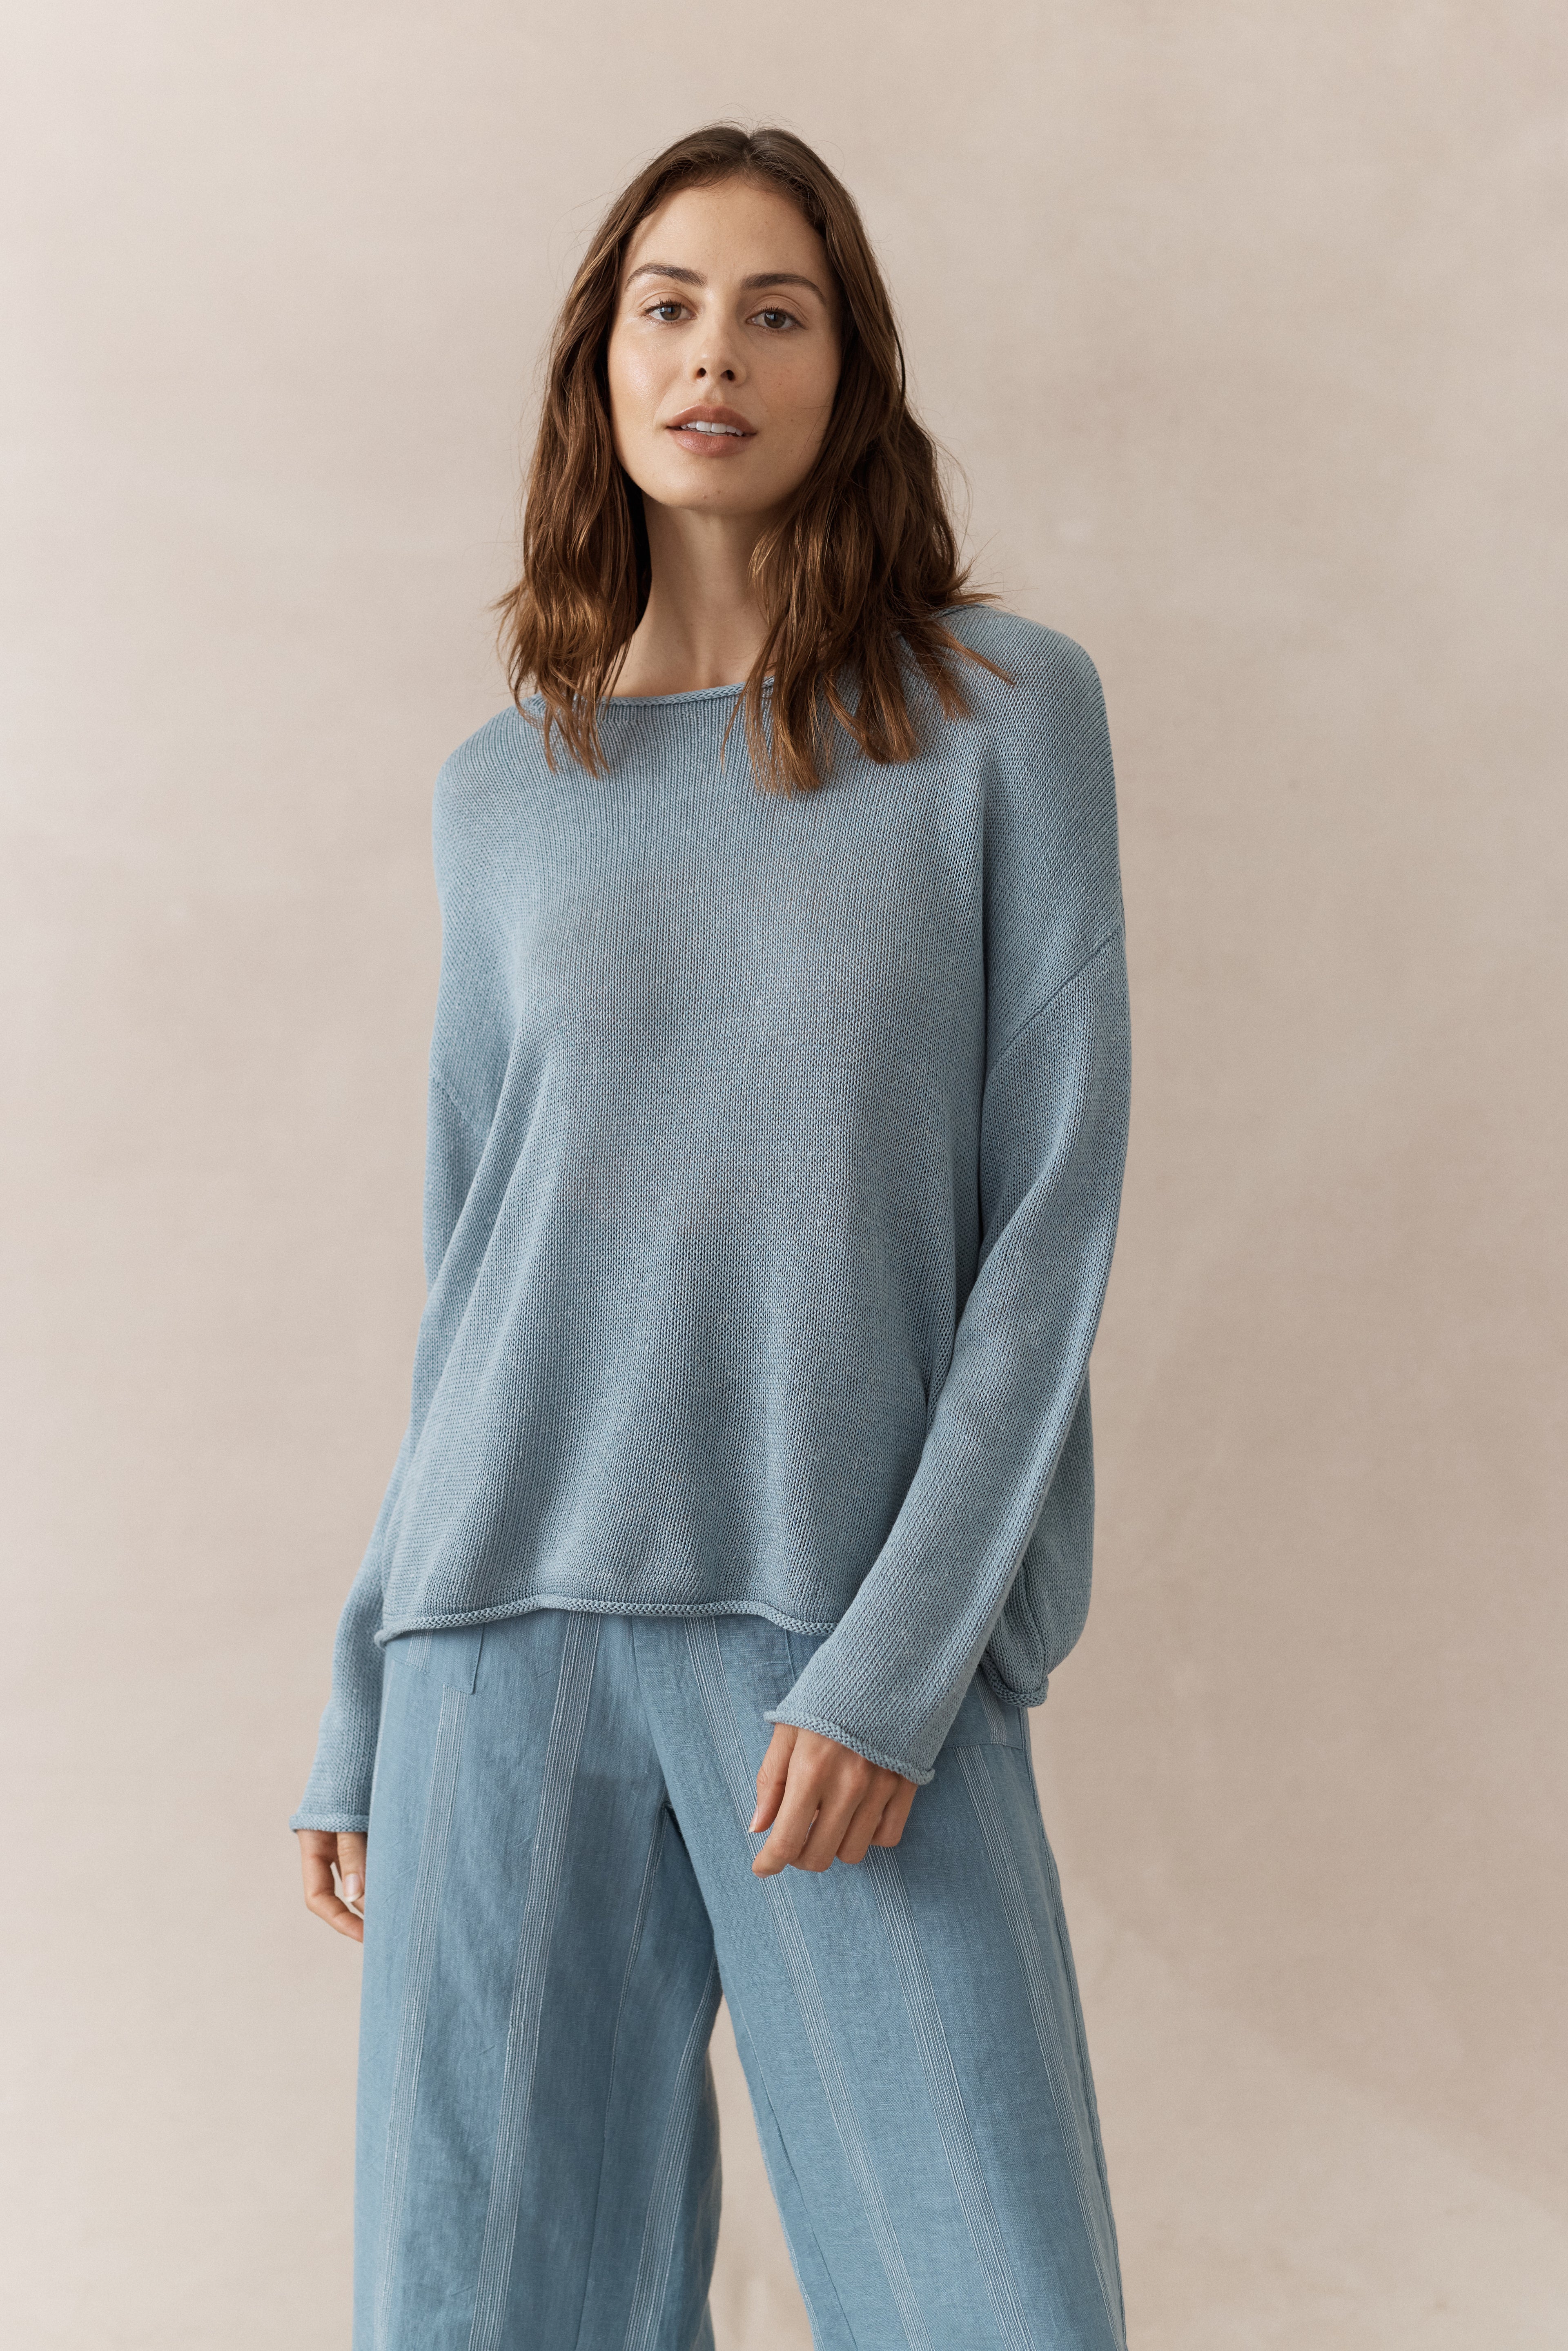 Spring Knit Pacific Blue